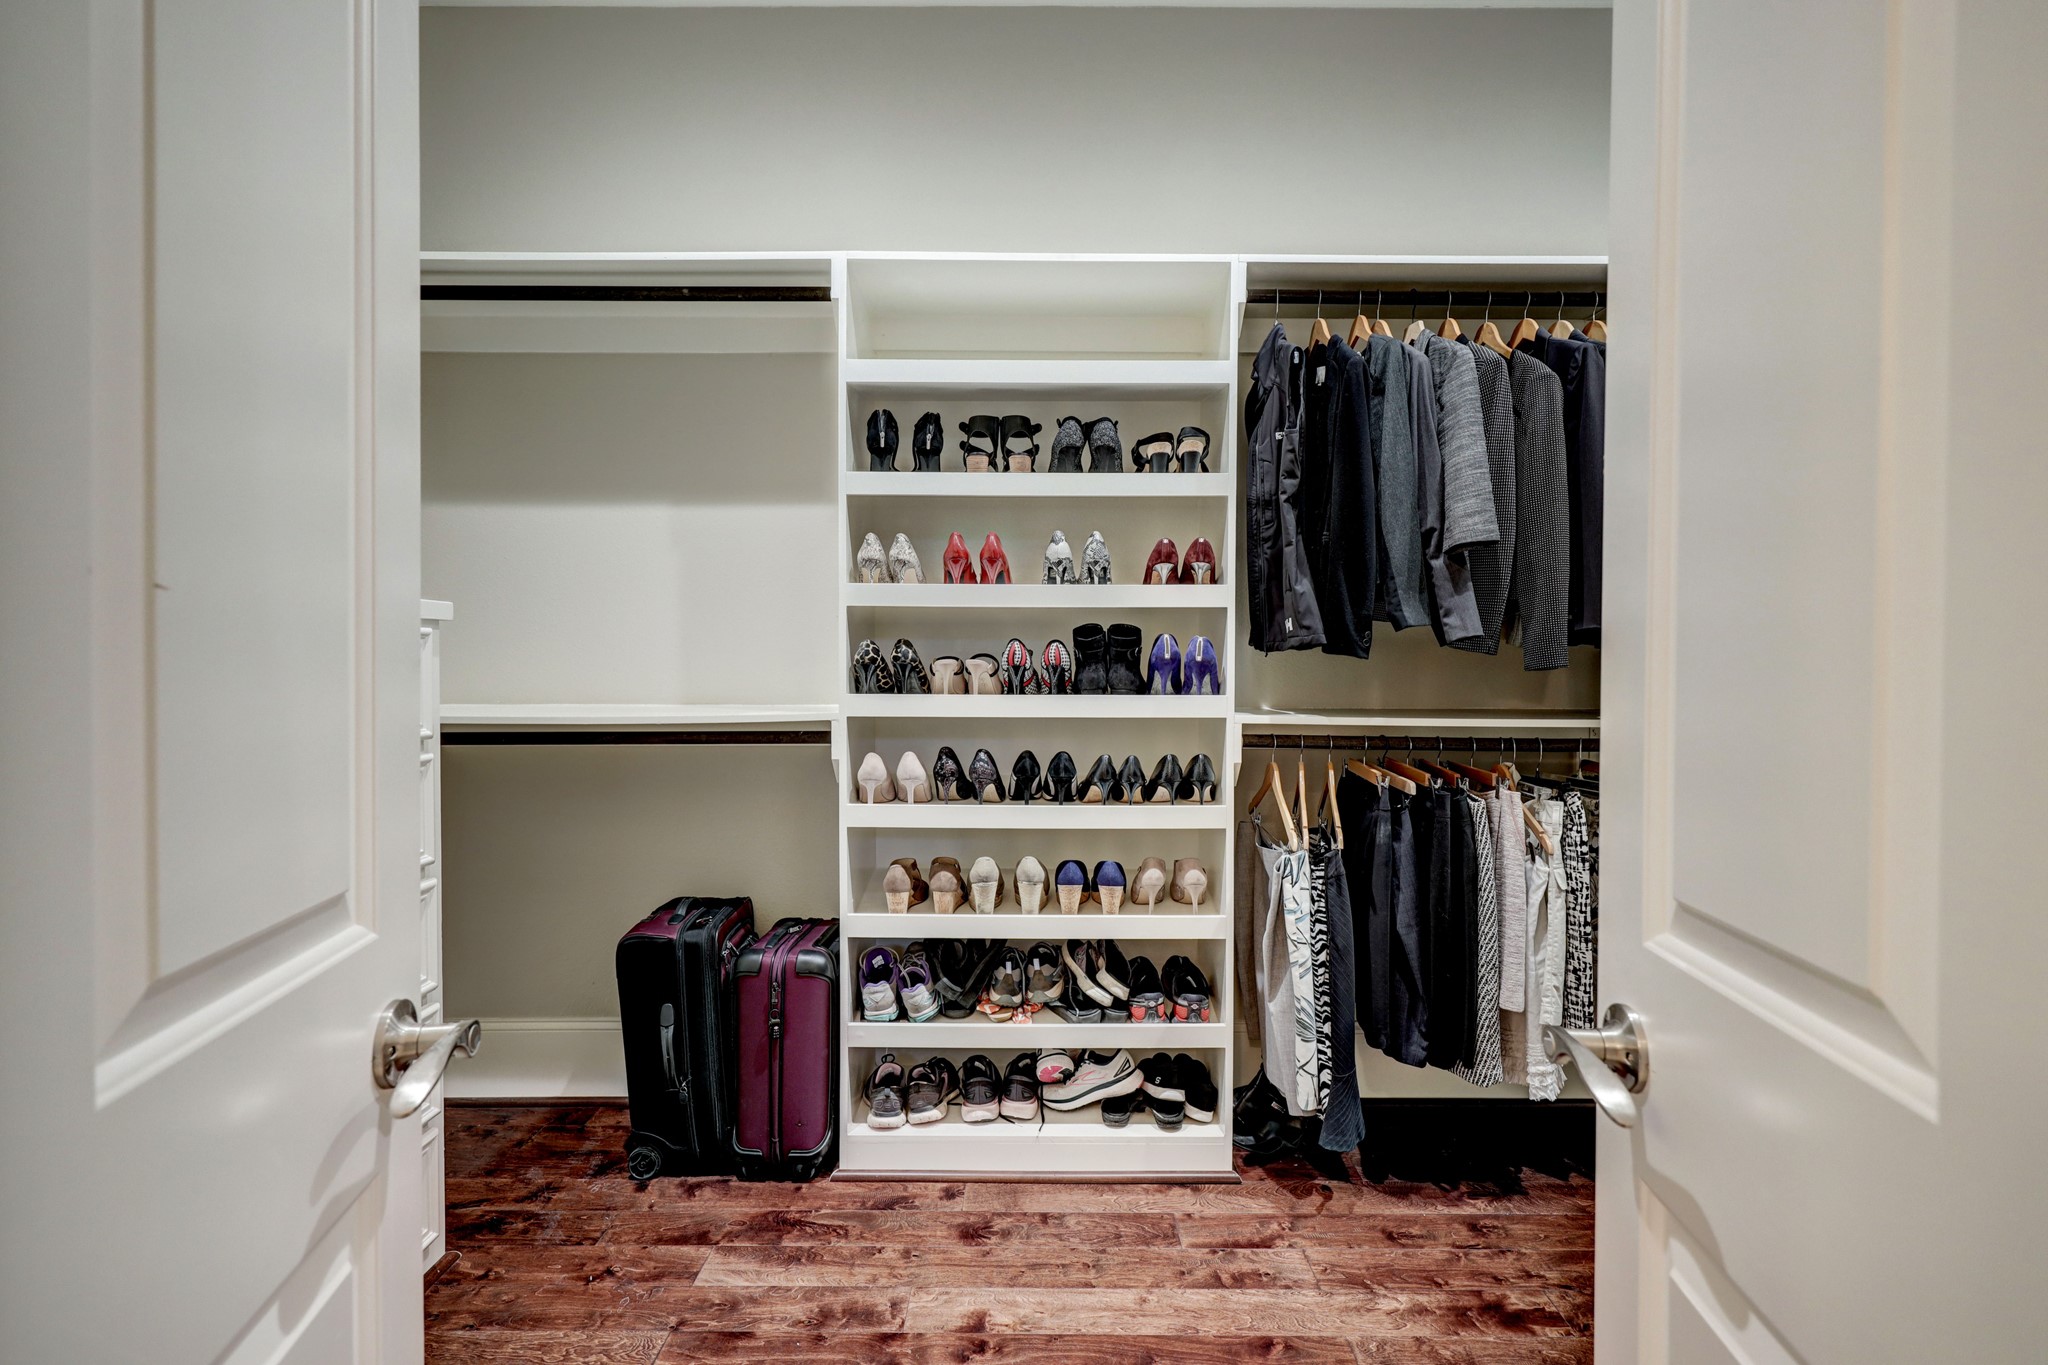 Look at this fabulous walk-in closet with built-in shelves and drawers and tons of hanging space and storage.